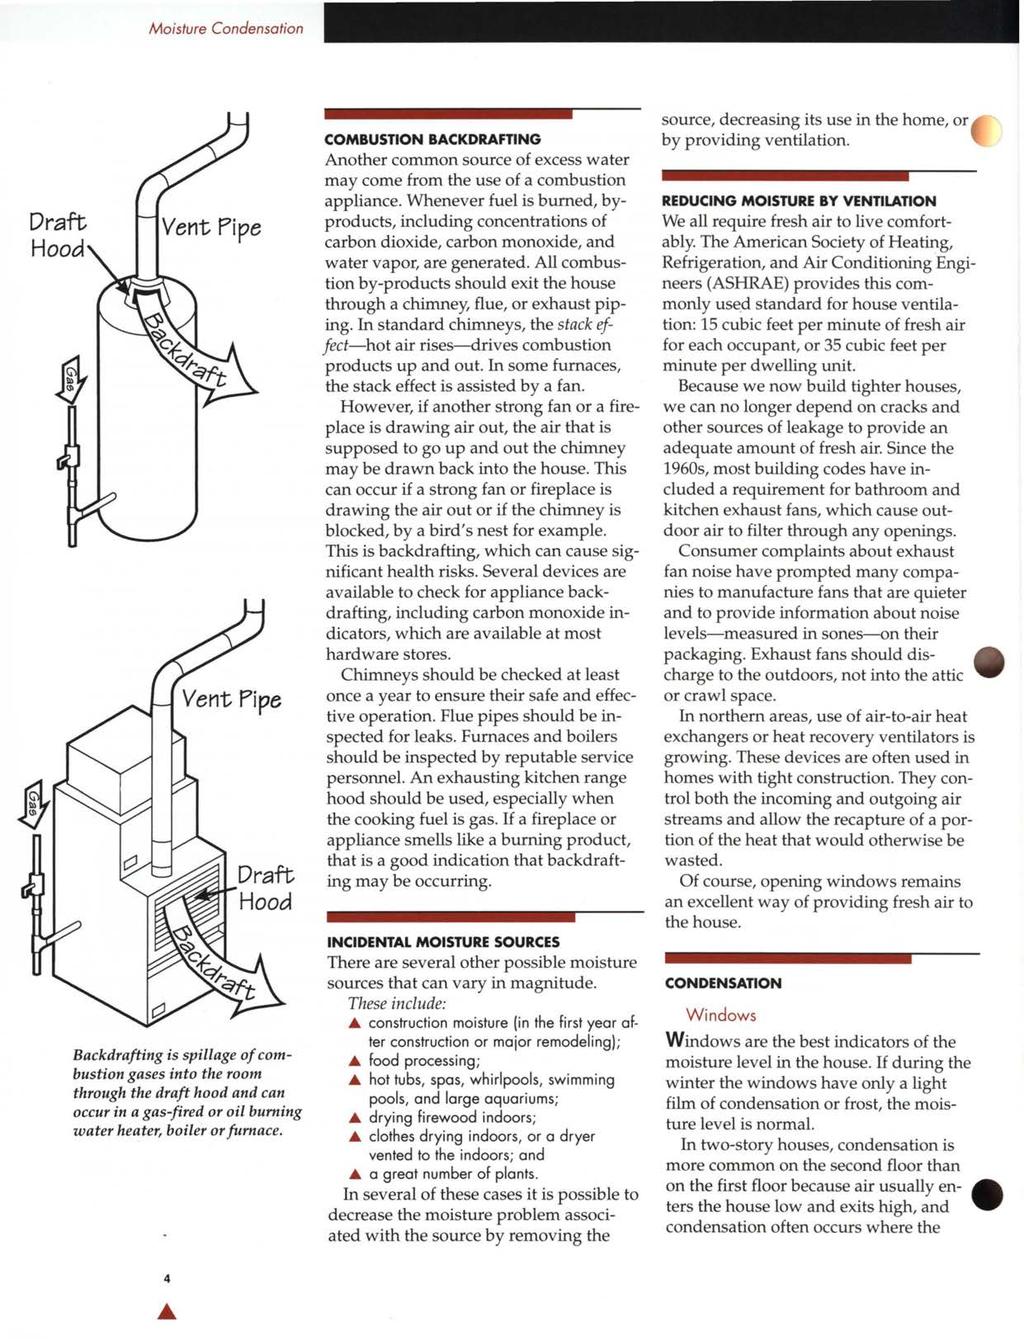 Moisture Condensation Draft Hood Backdrafting is spillage of combustion gases into the room through the draft hood and can occur in a gas-fired or oil burning water heater, boiler or furnace.